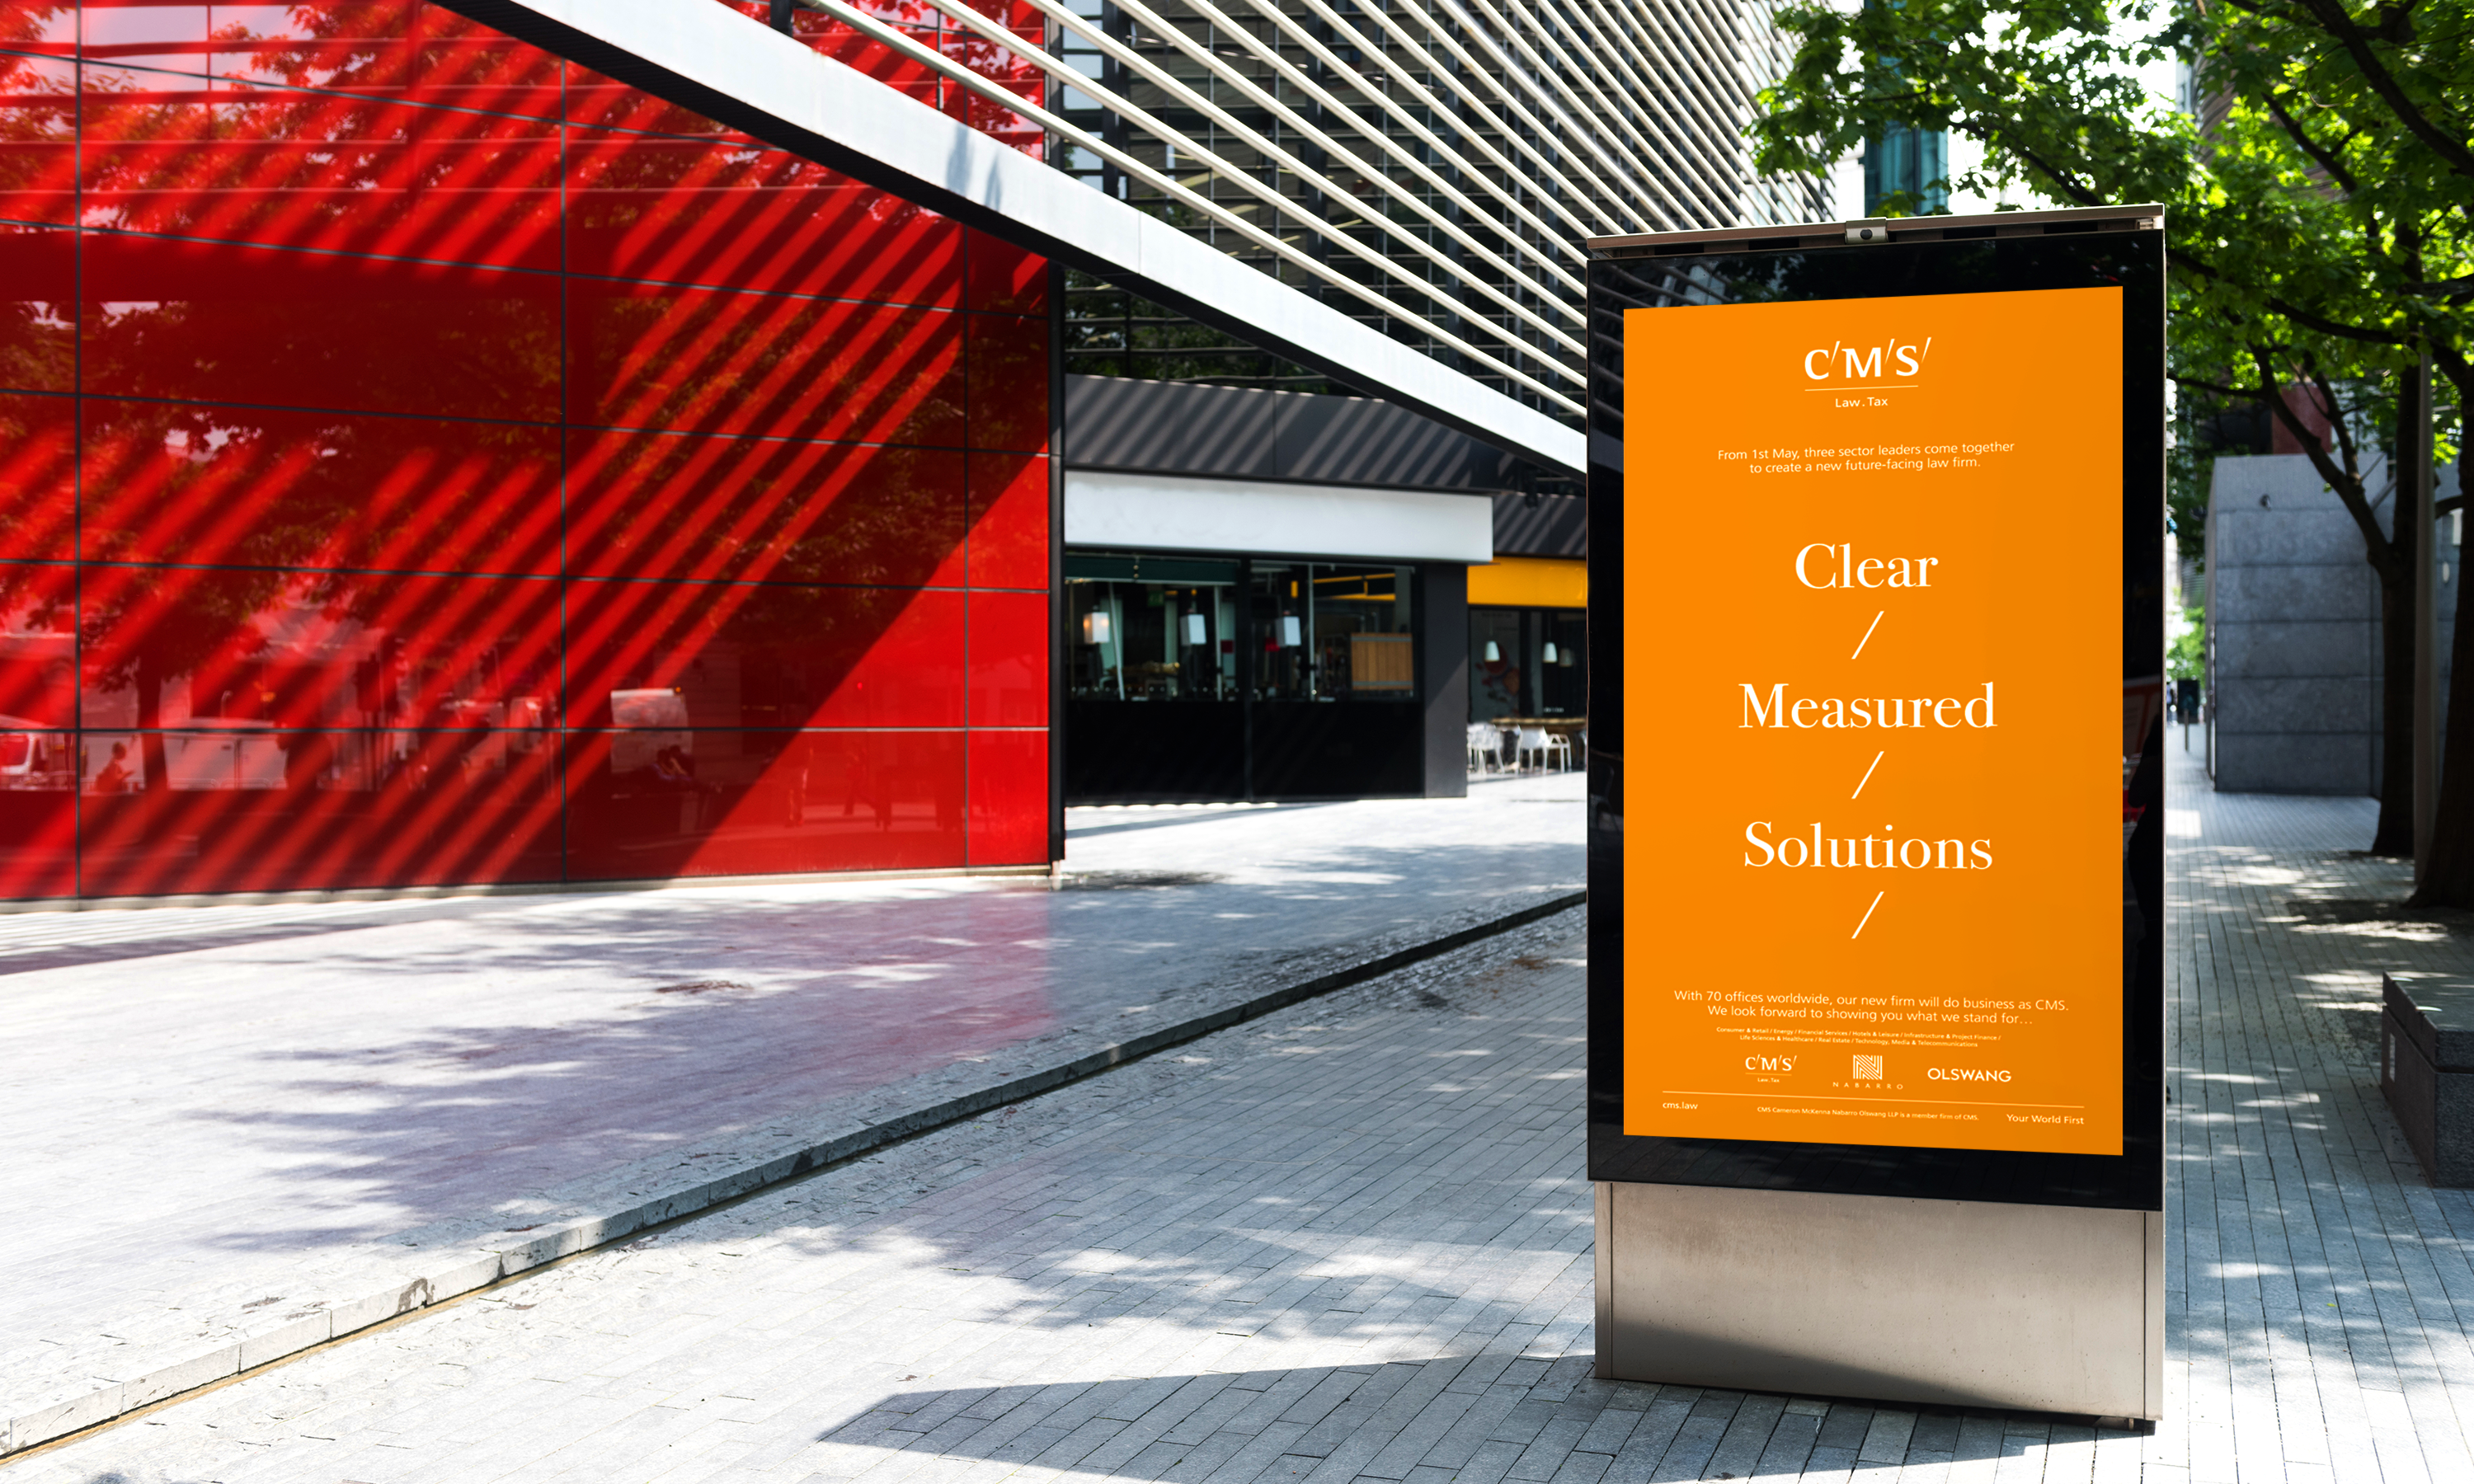 Branding and advertising by Neon - CMS London Law Firm - Law sector branding - Clear Measured Solutions poster designed by Dana Robertson